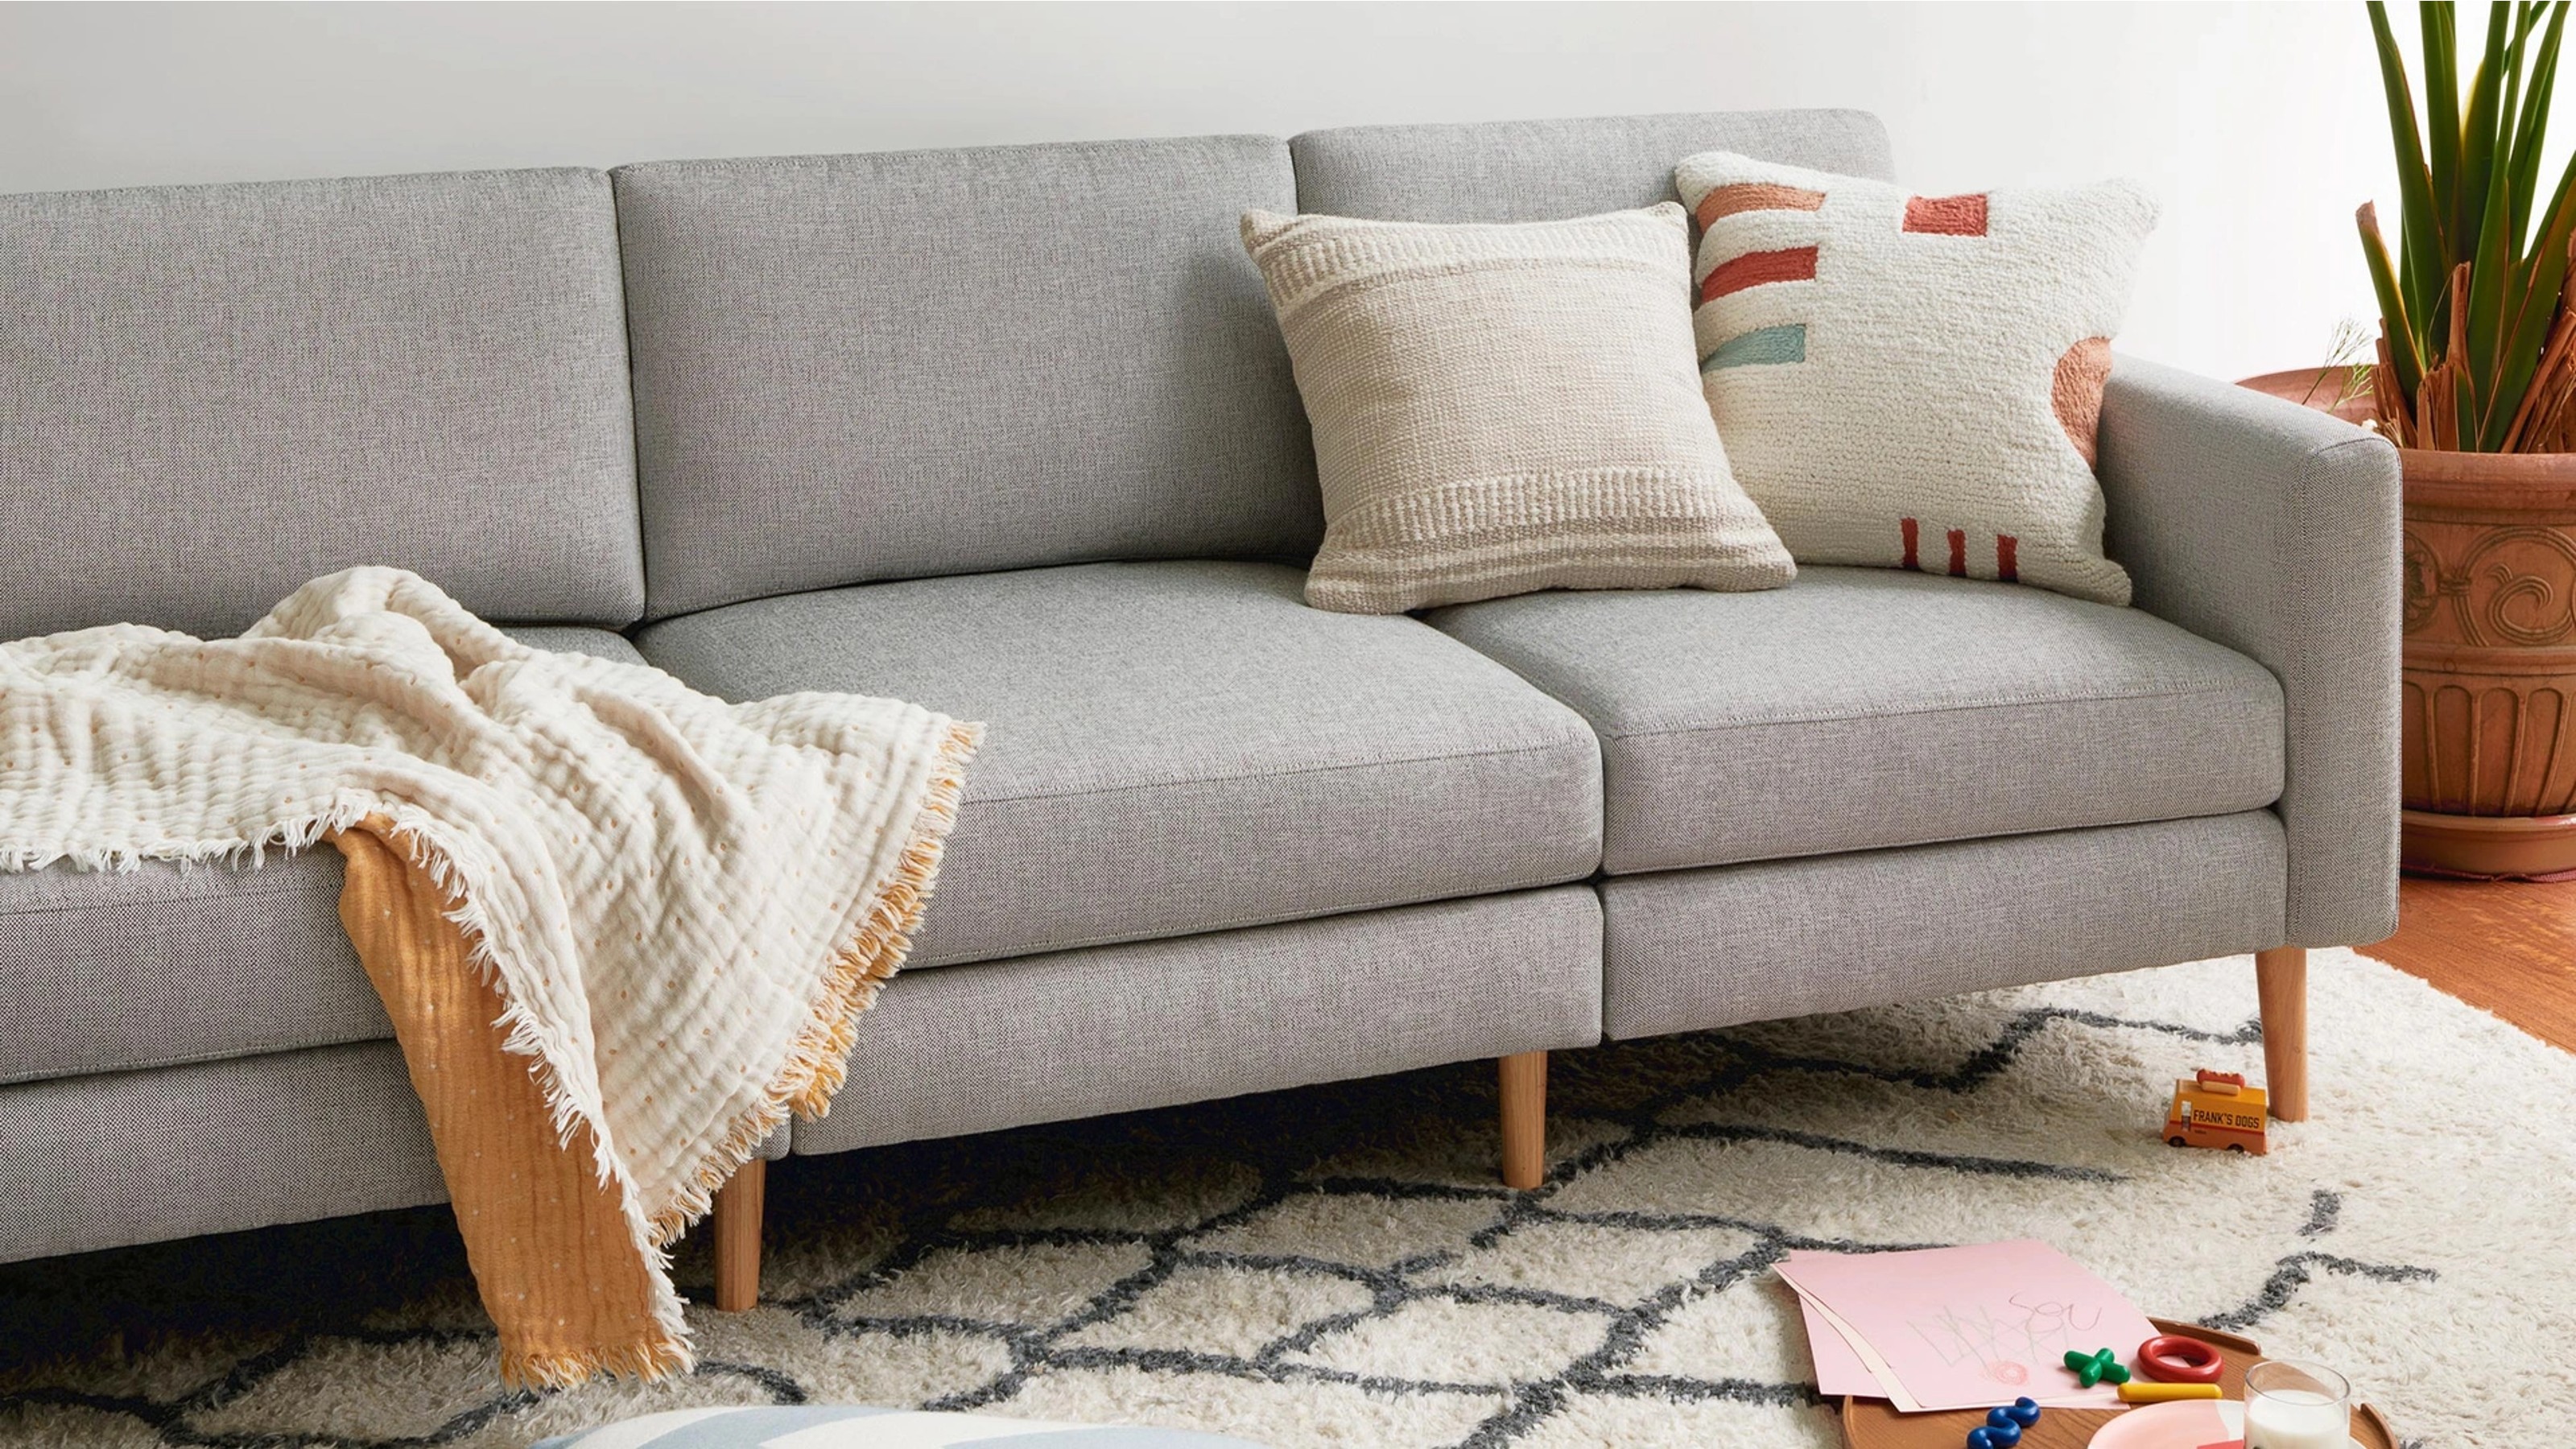 Is A Burrow Couch Best For Homebodies? We Review - The Good Trade